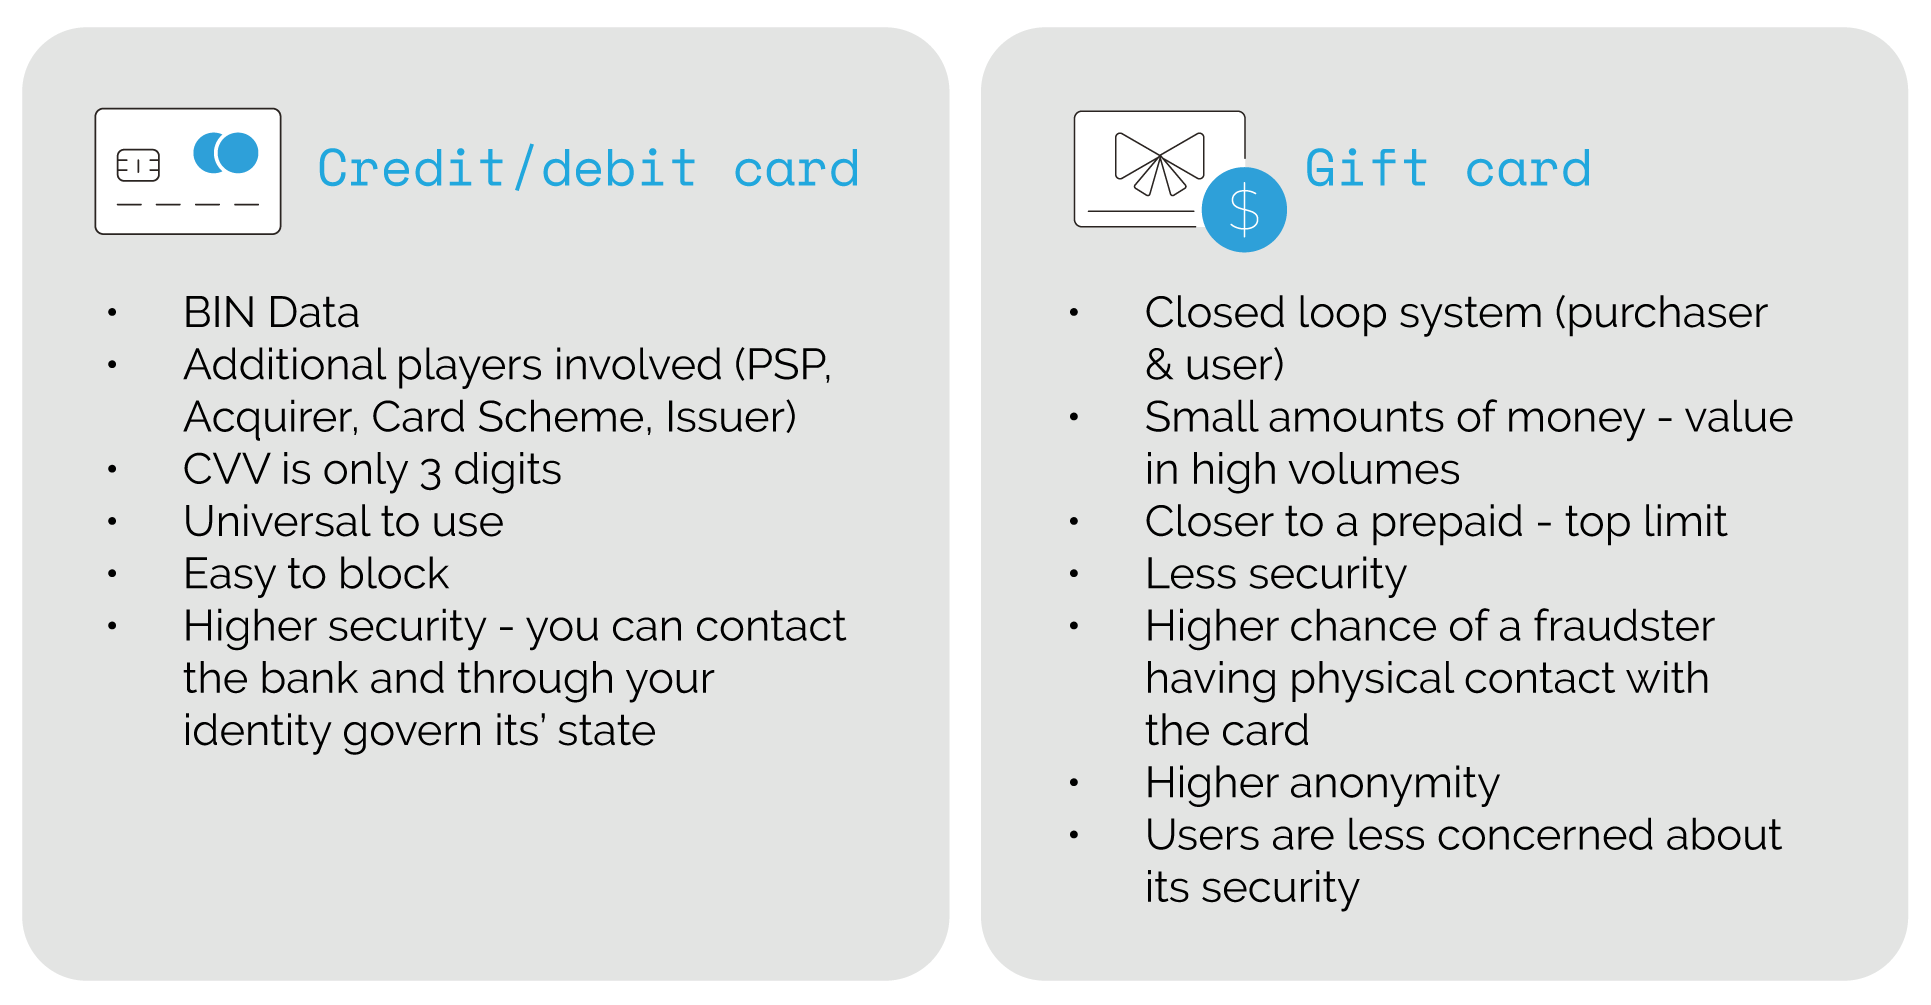 credit-cards-vs-gift-cards